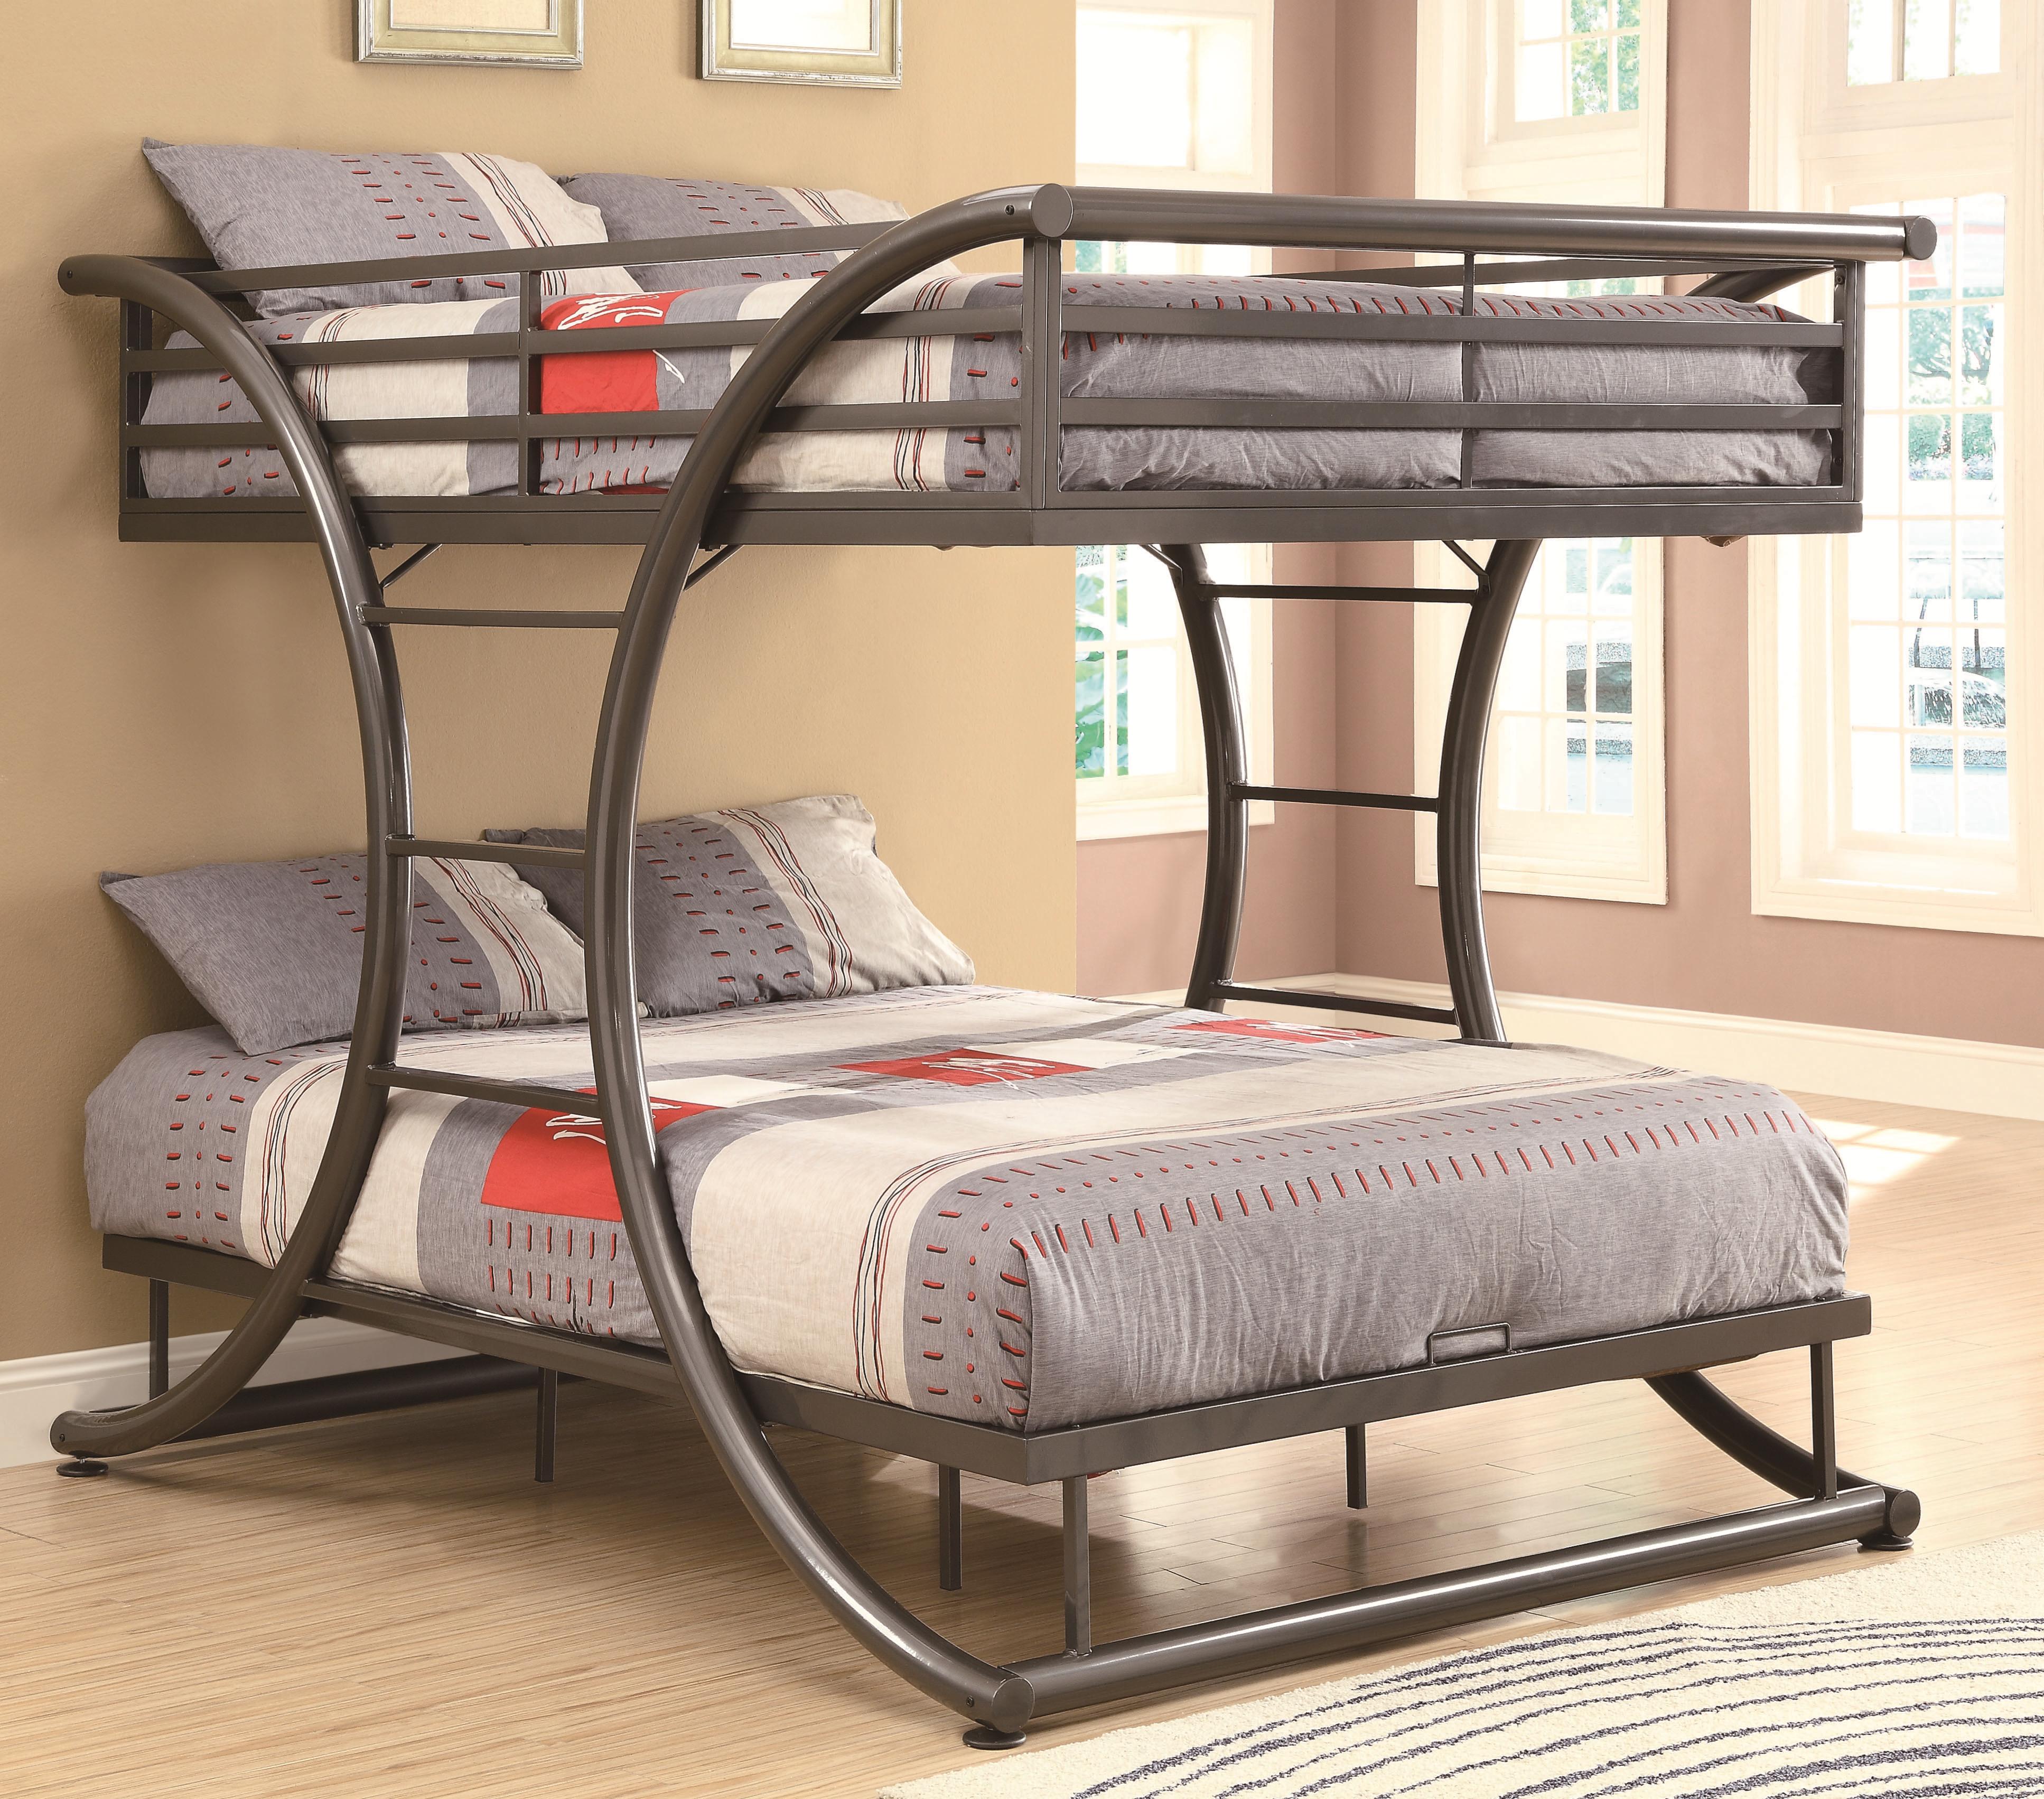 full size bed bunk beds